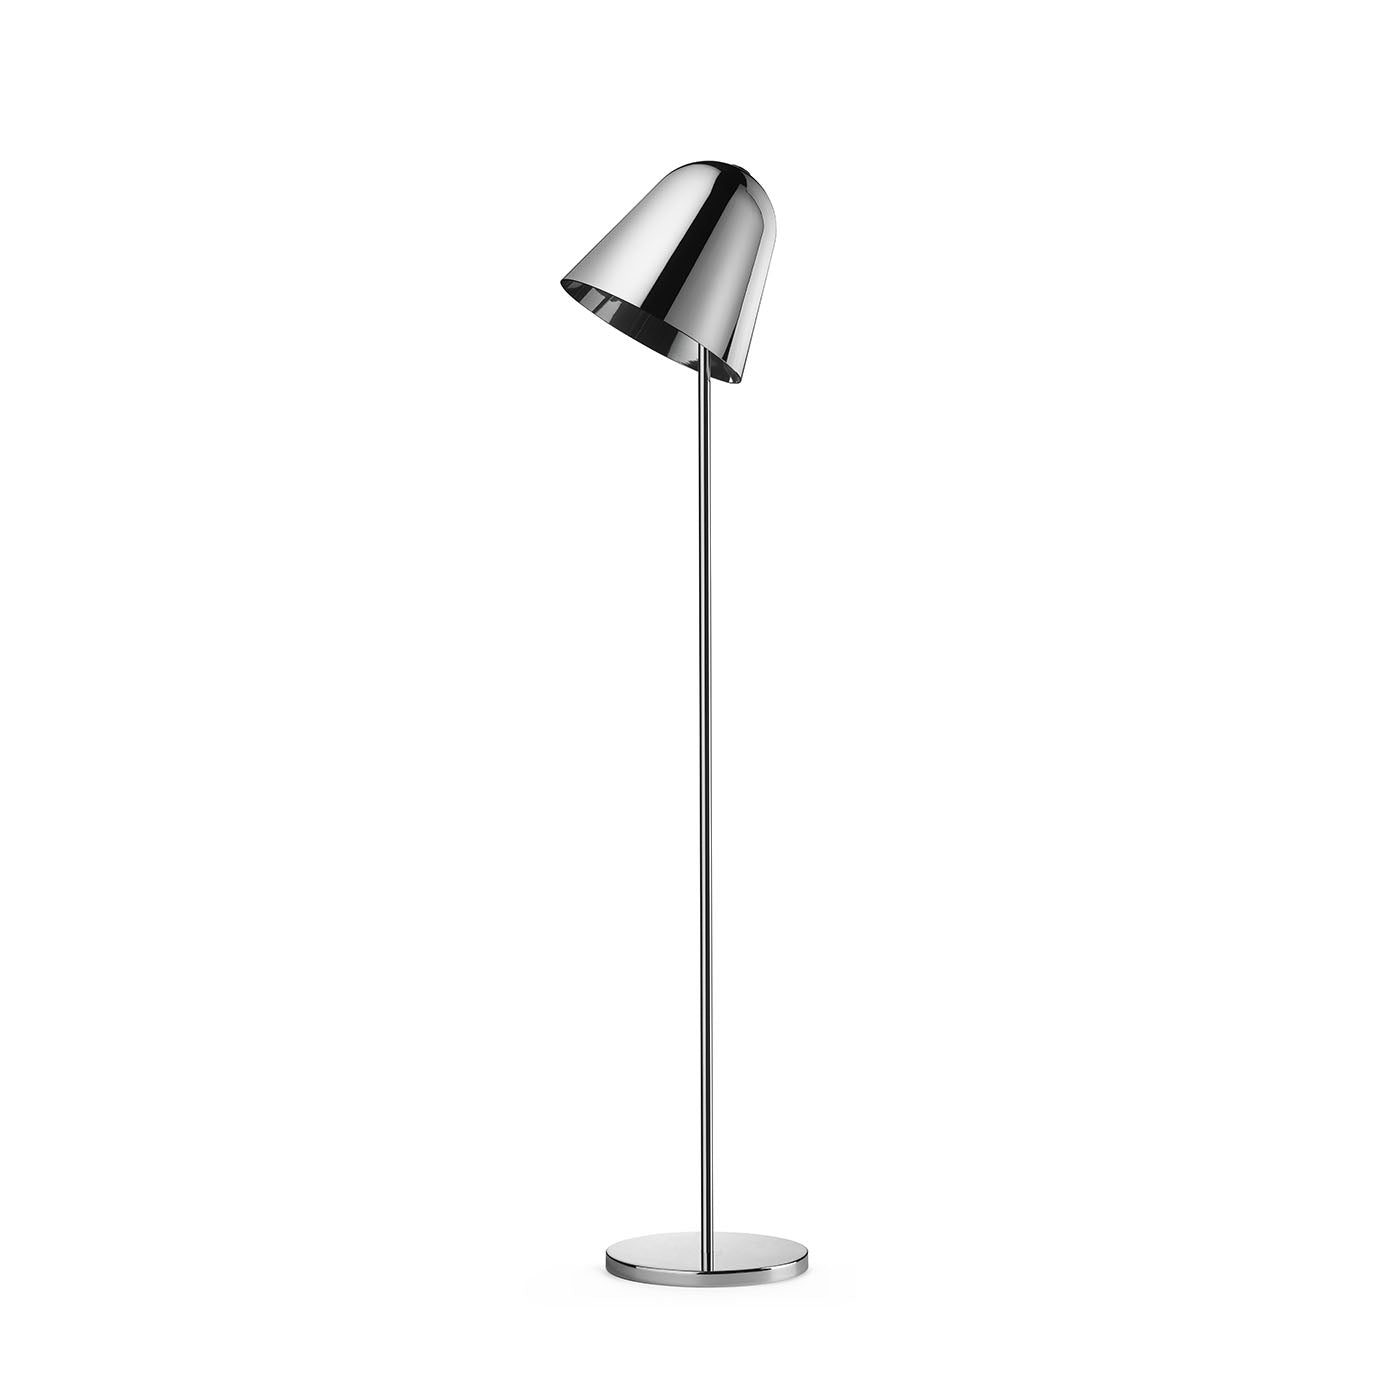 Helios Silvery Metal & Glass Floor Lamp by Branch Creative - Alternative view 1